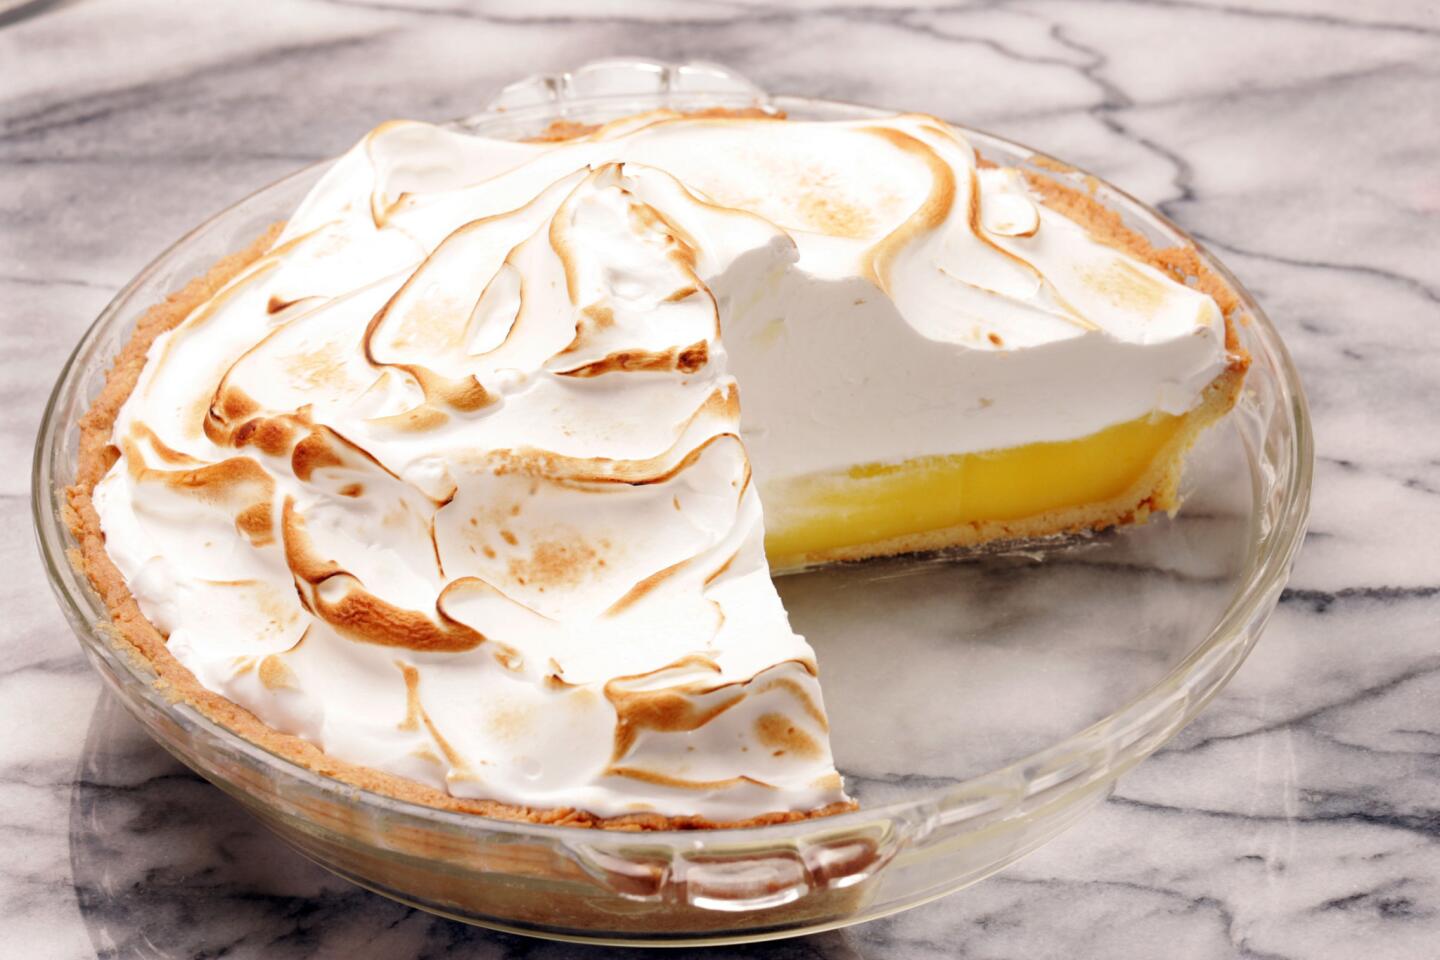 And just one more: A rich lemon curd stands at the center of this terrific pie. Recipe: Lemon meringue pie